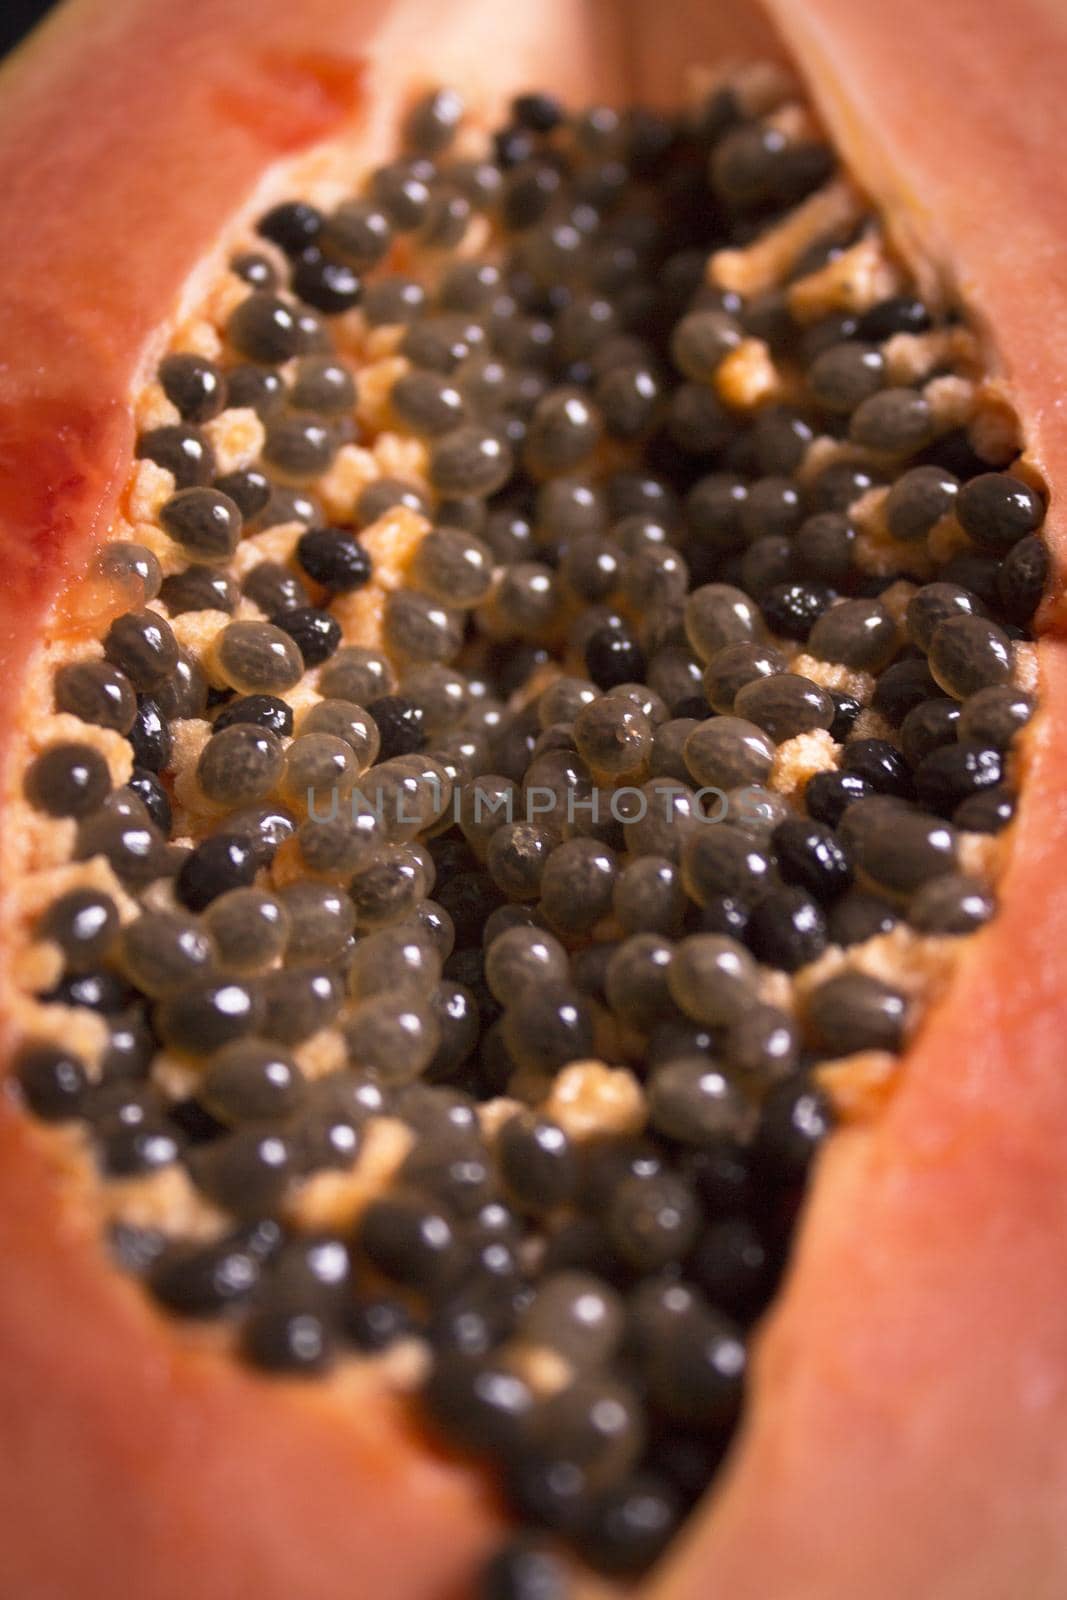 Half of an open papaya with the seeds. No people